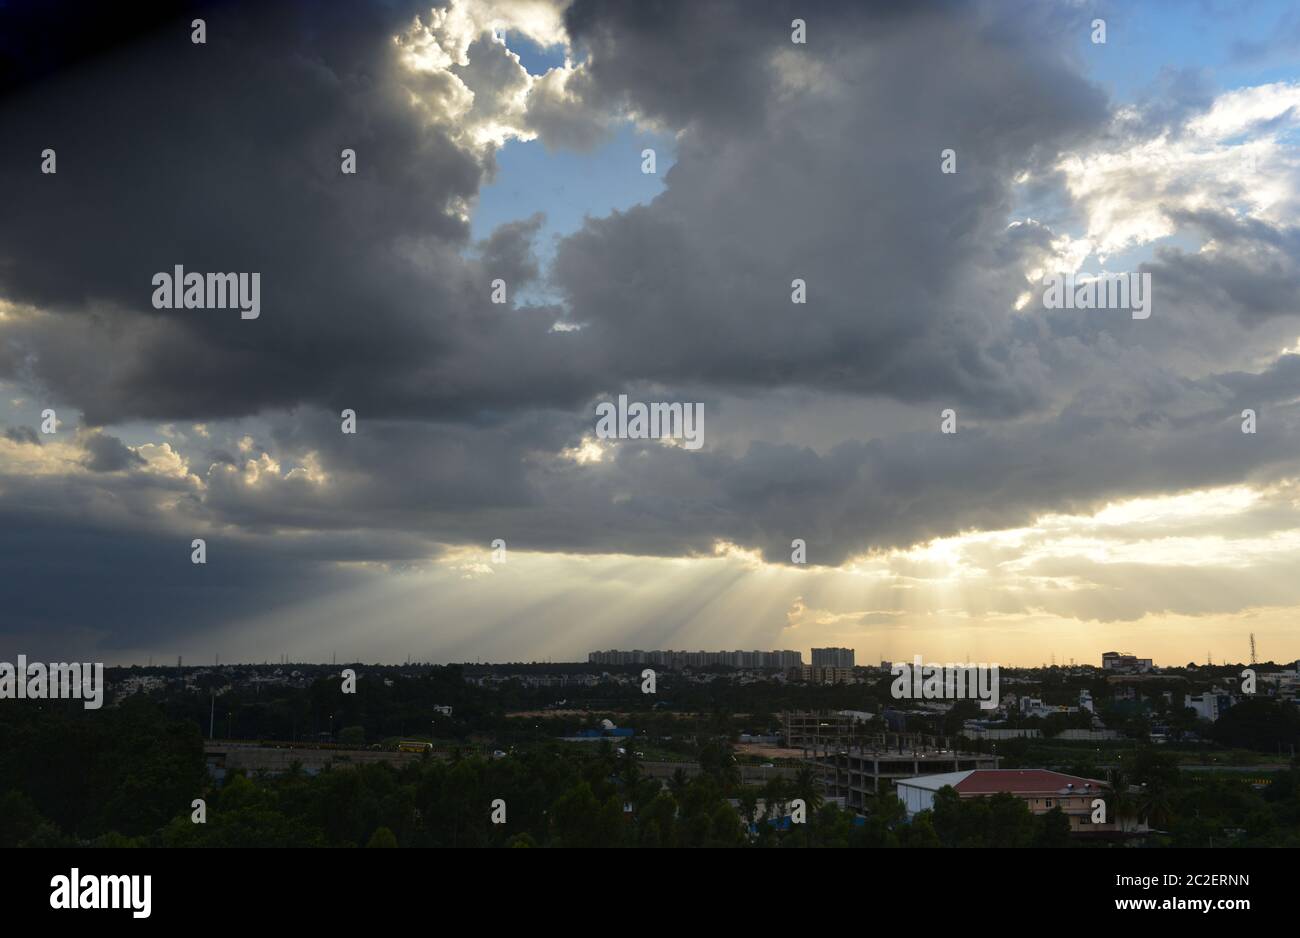 Apartments in a real estate development in Asia in the monsoon season Stock Photo